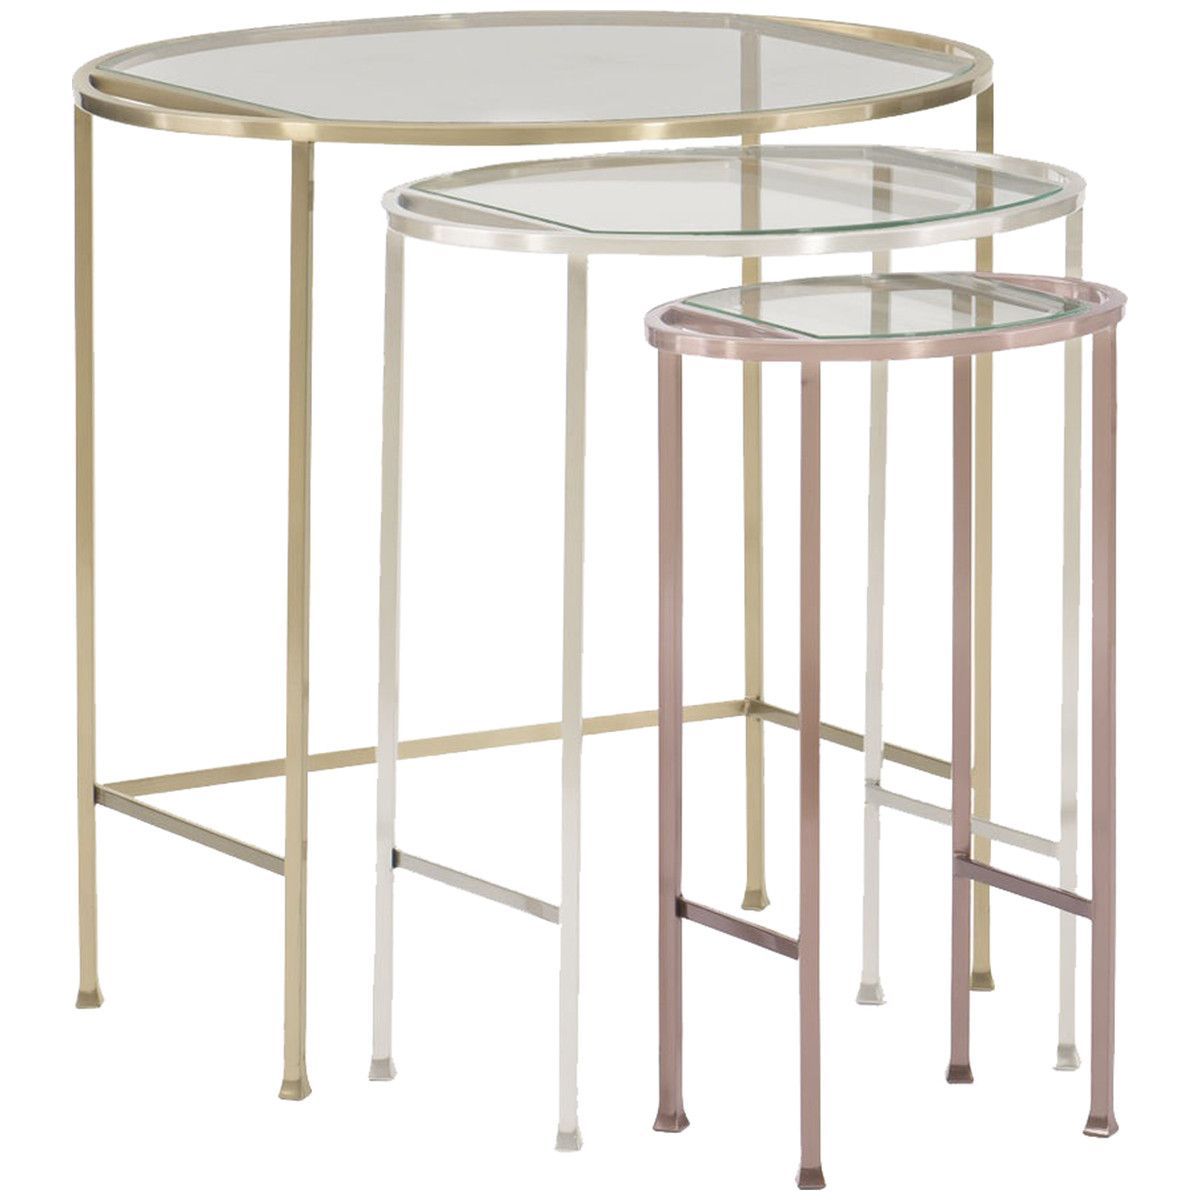 caracole classic yours mine and ours nesting table products clarissa metal accent tall dining set brown end tables furniture red round side outside storage bench champagne ice